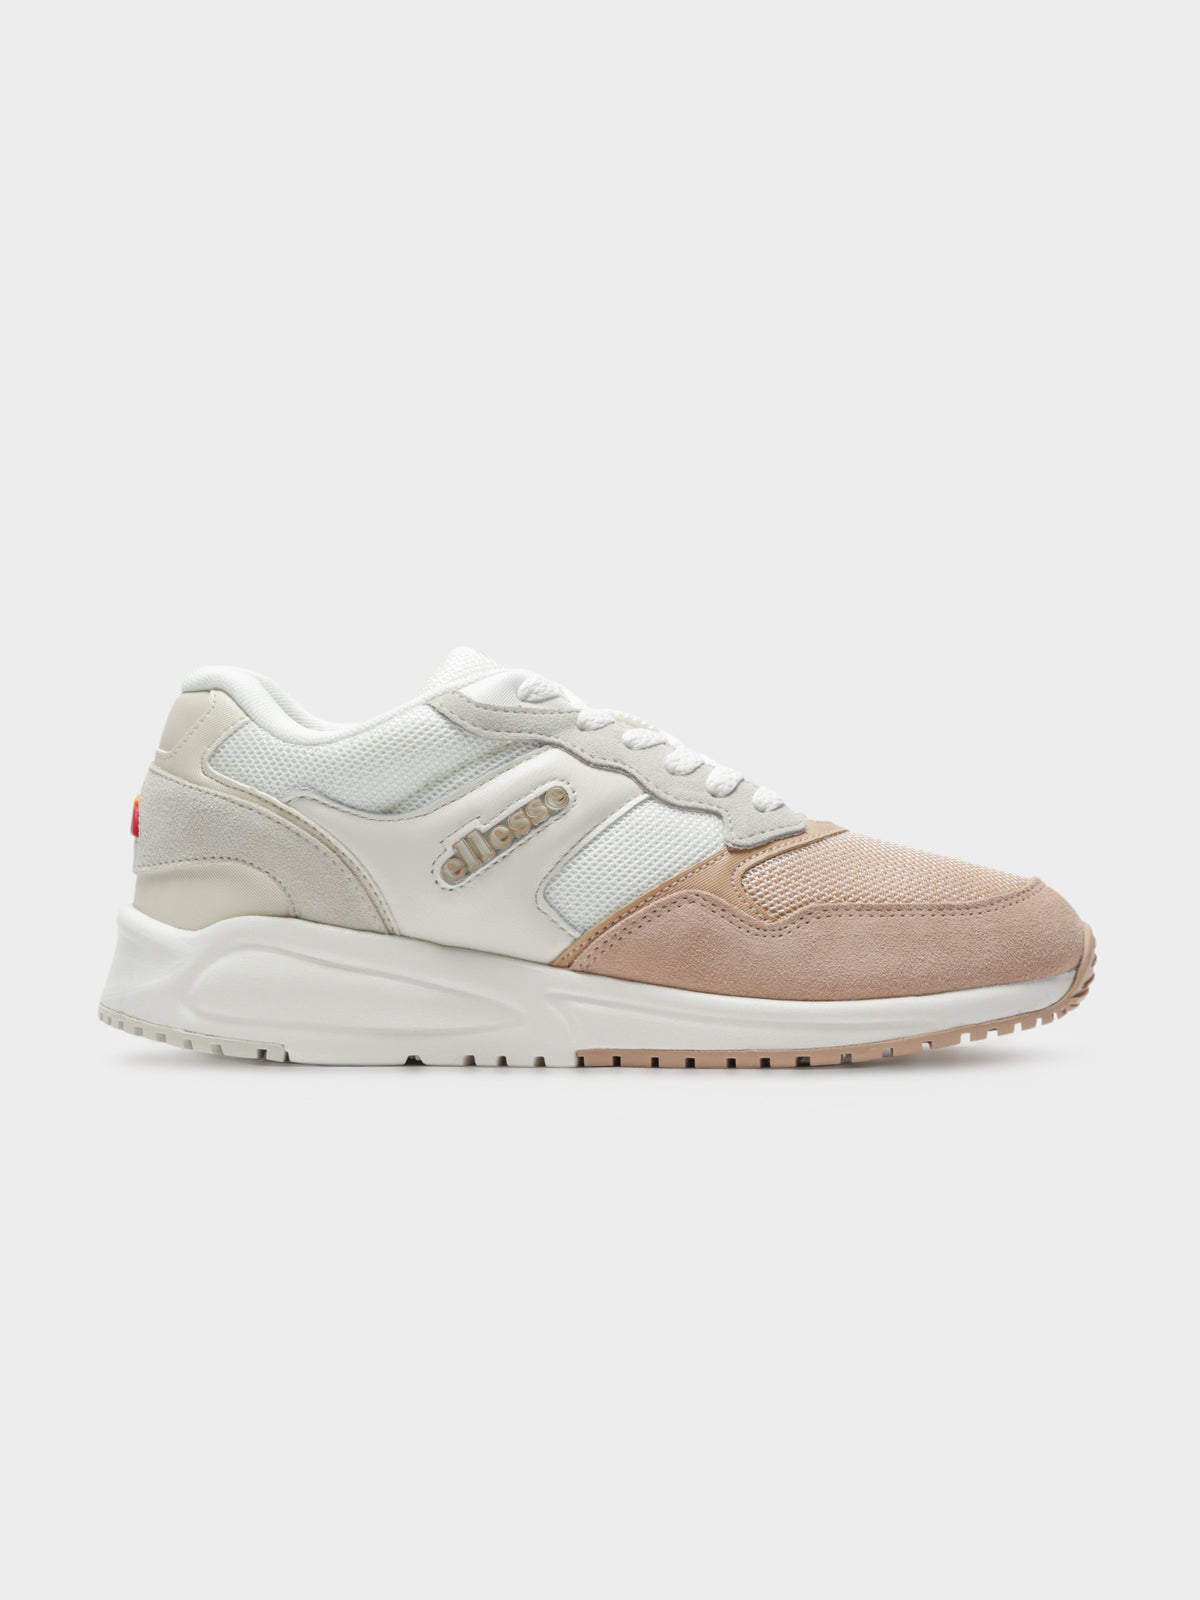 Womens NYC84 Sneakers in Off White &amp;amp; Beige